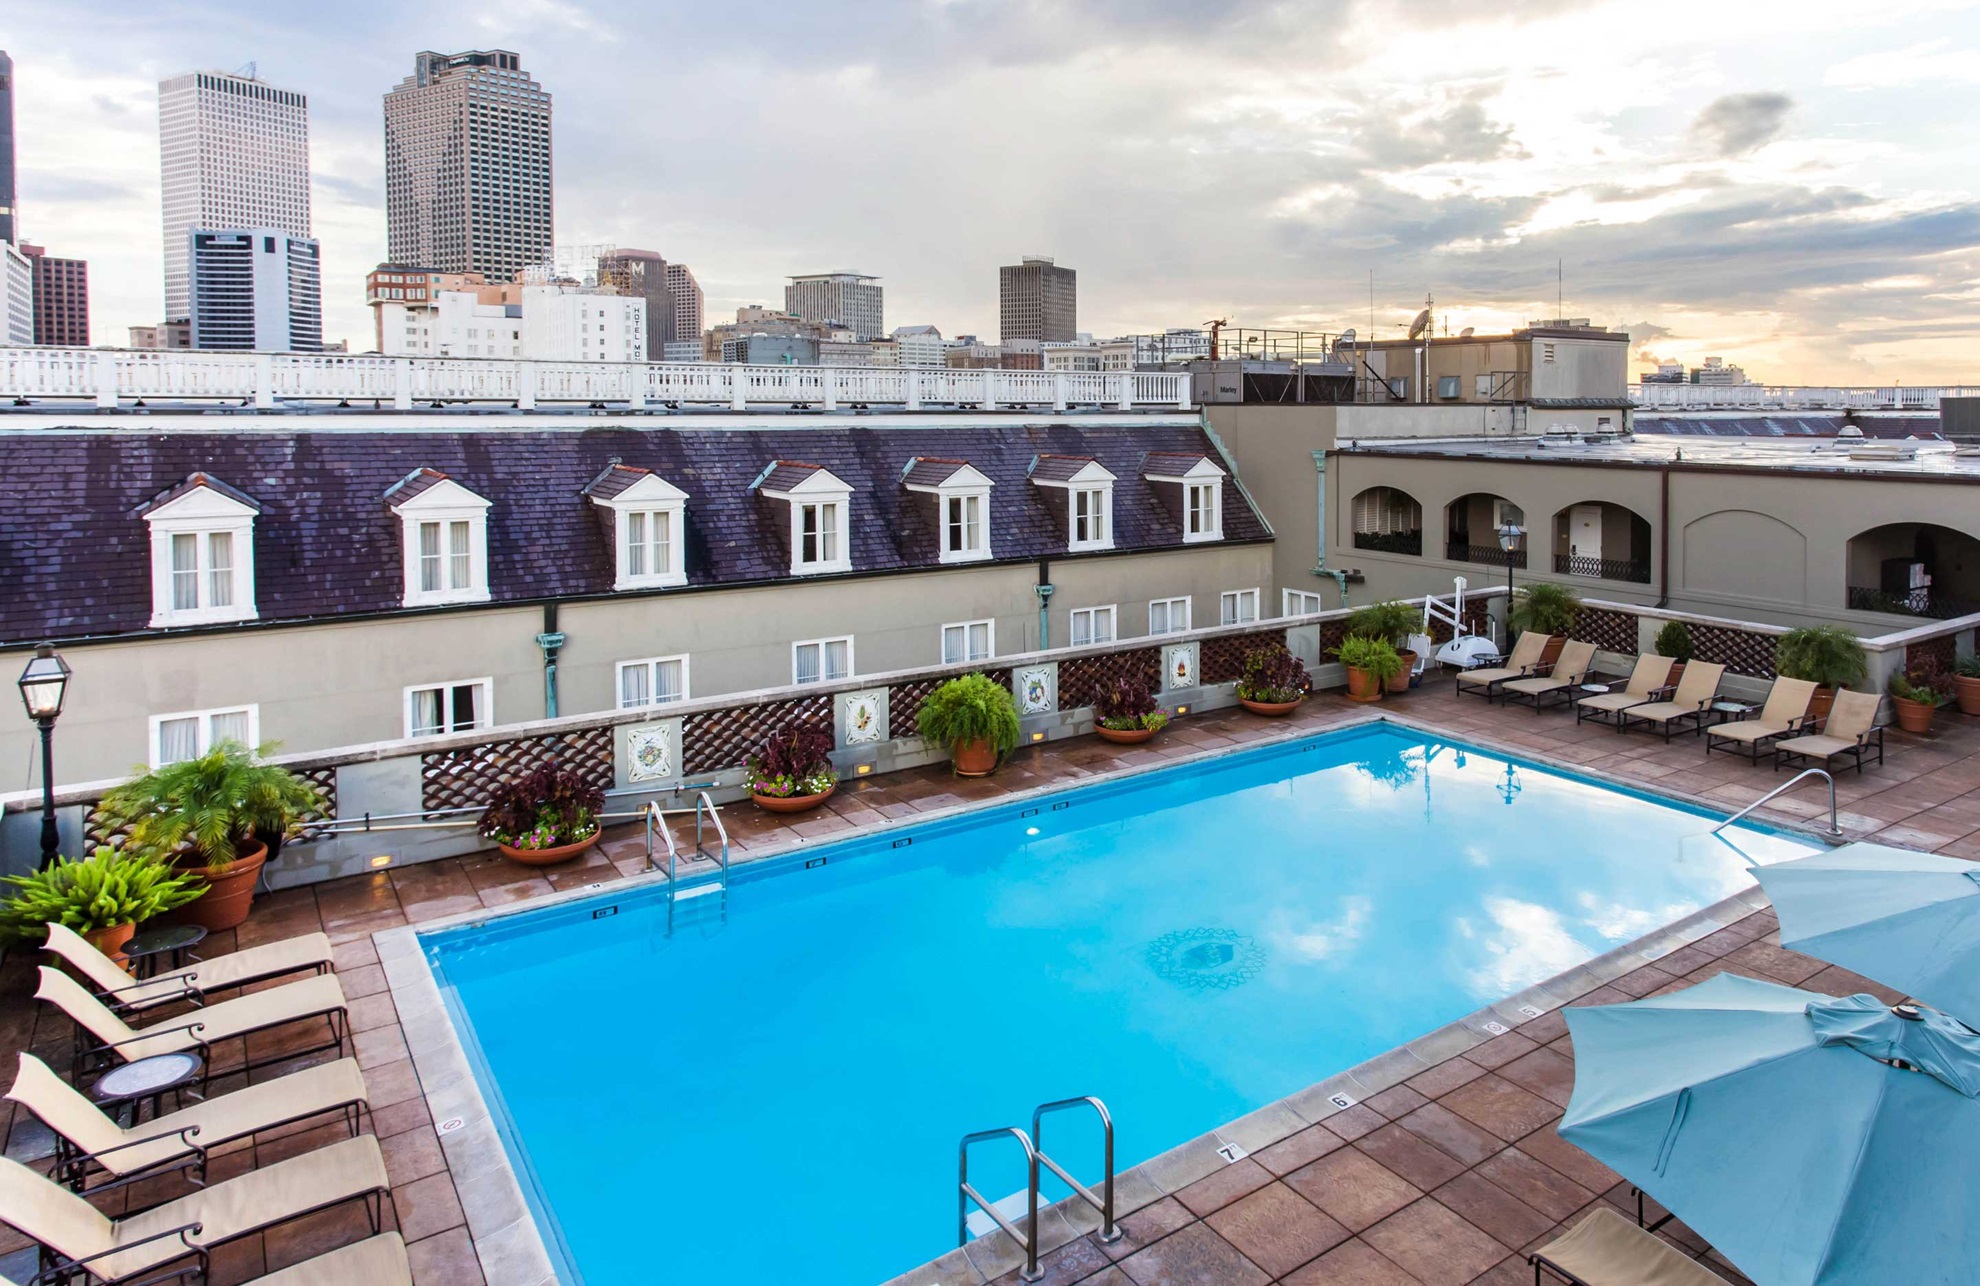 Outdoor pool at Omni Royal Orleans